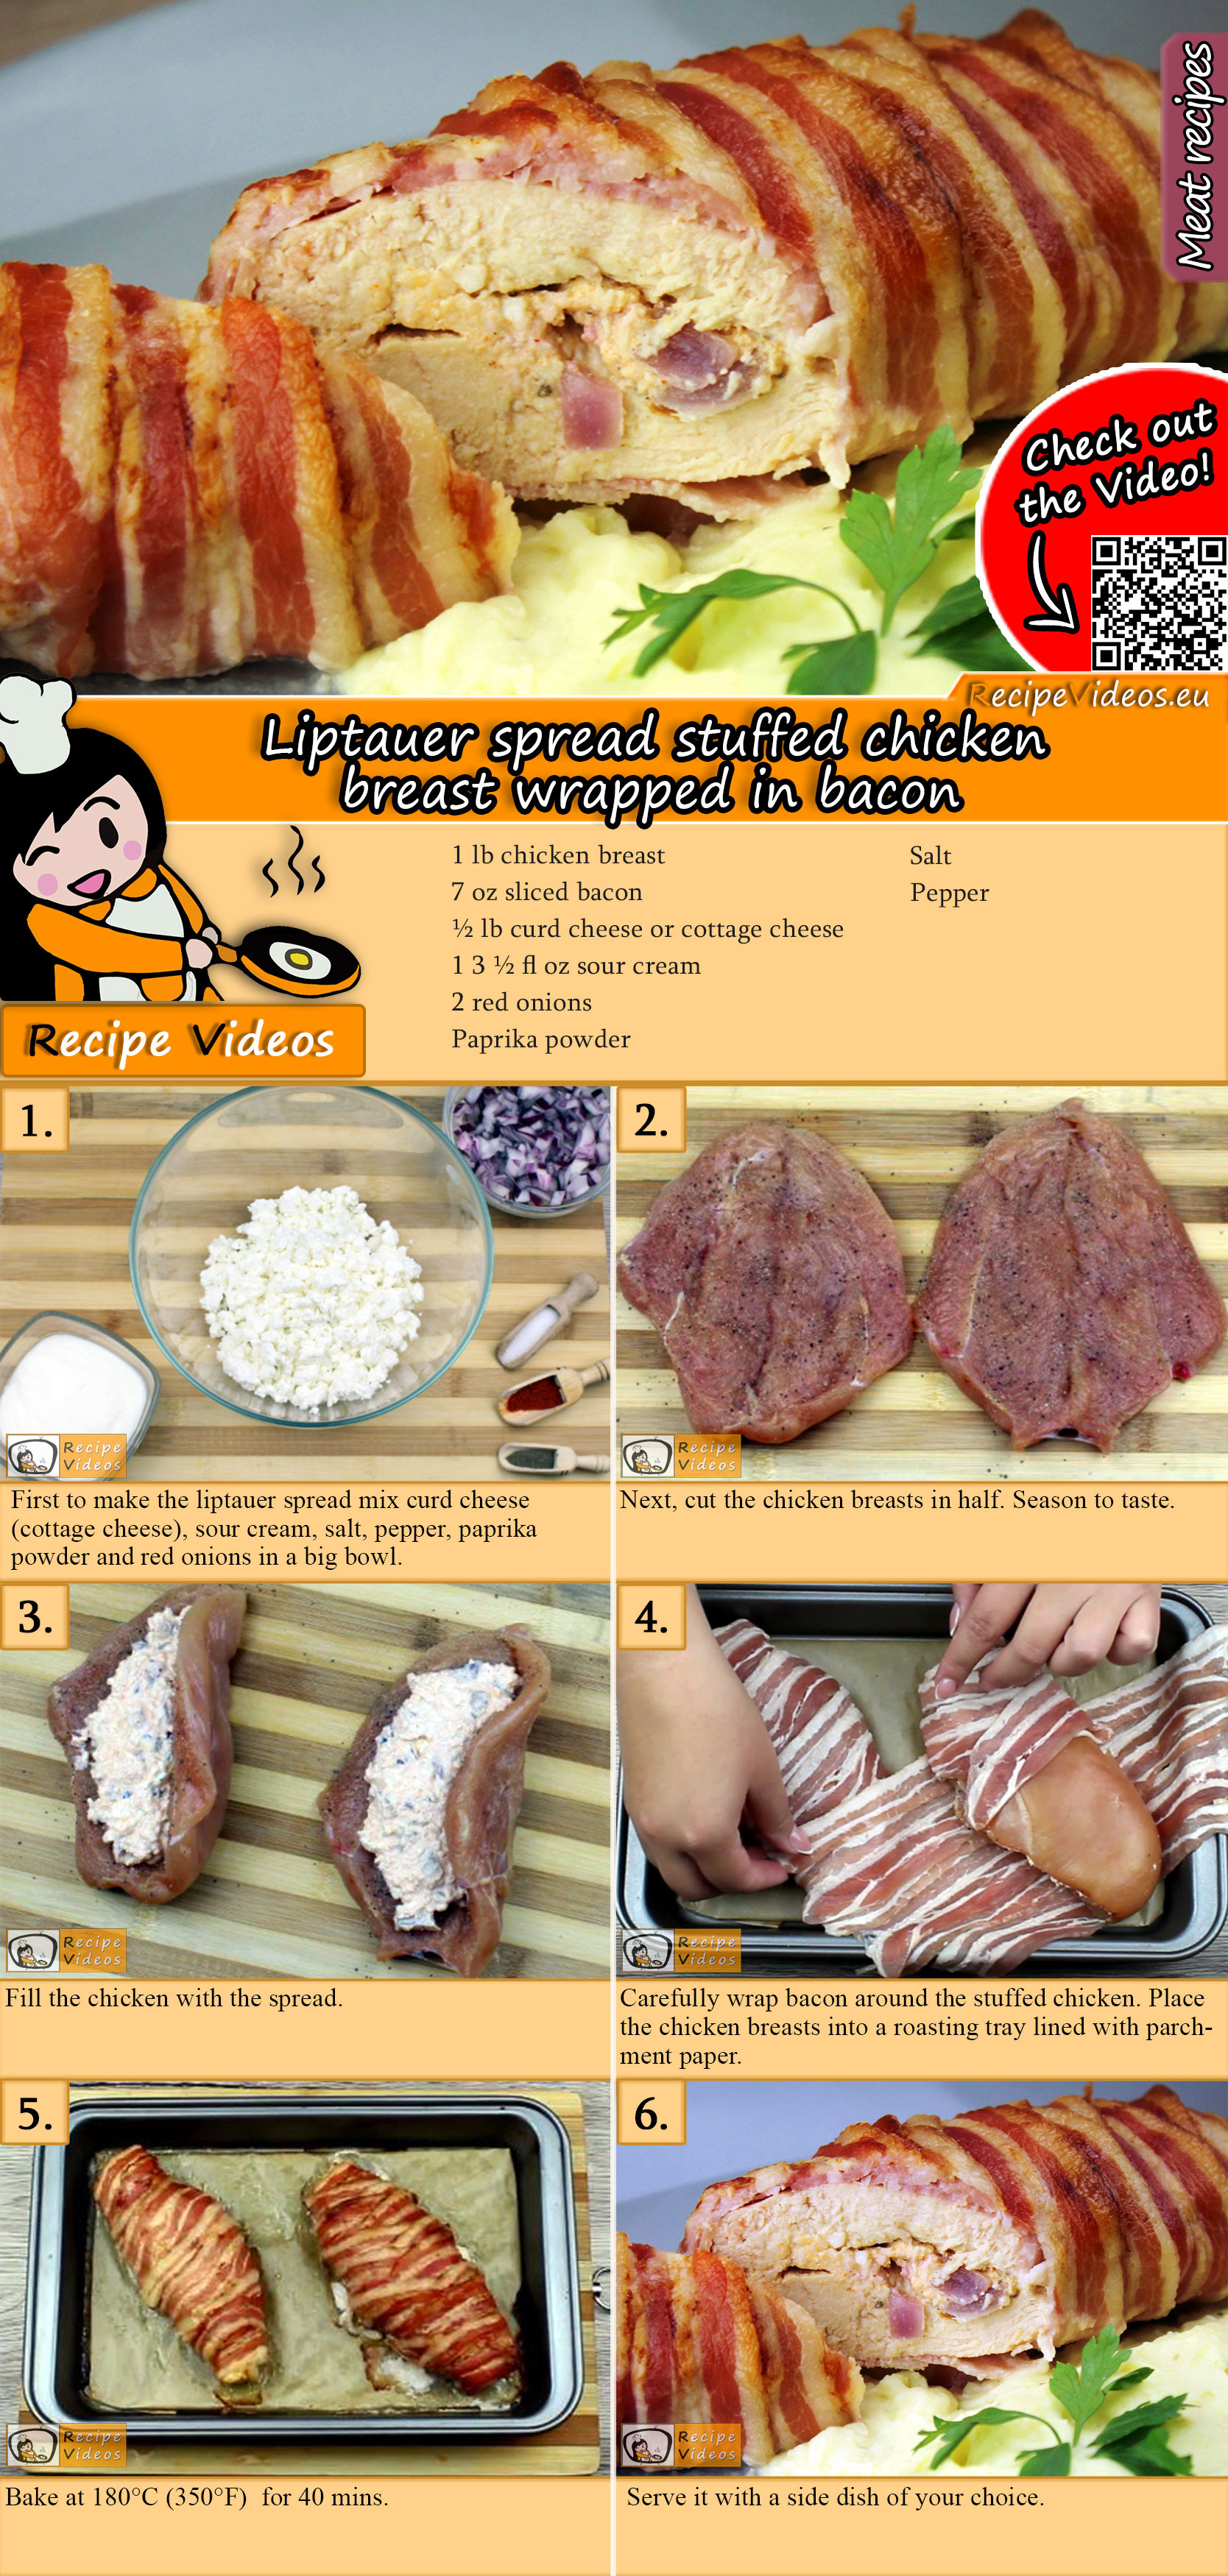 Liptauer spread stuffed chicken breast wrapped in bacon recipe with video